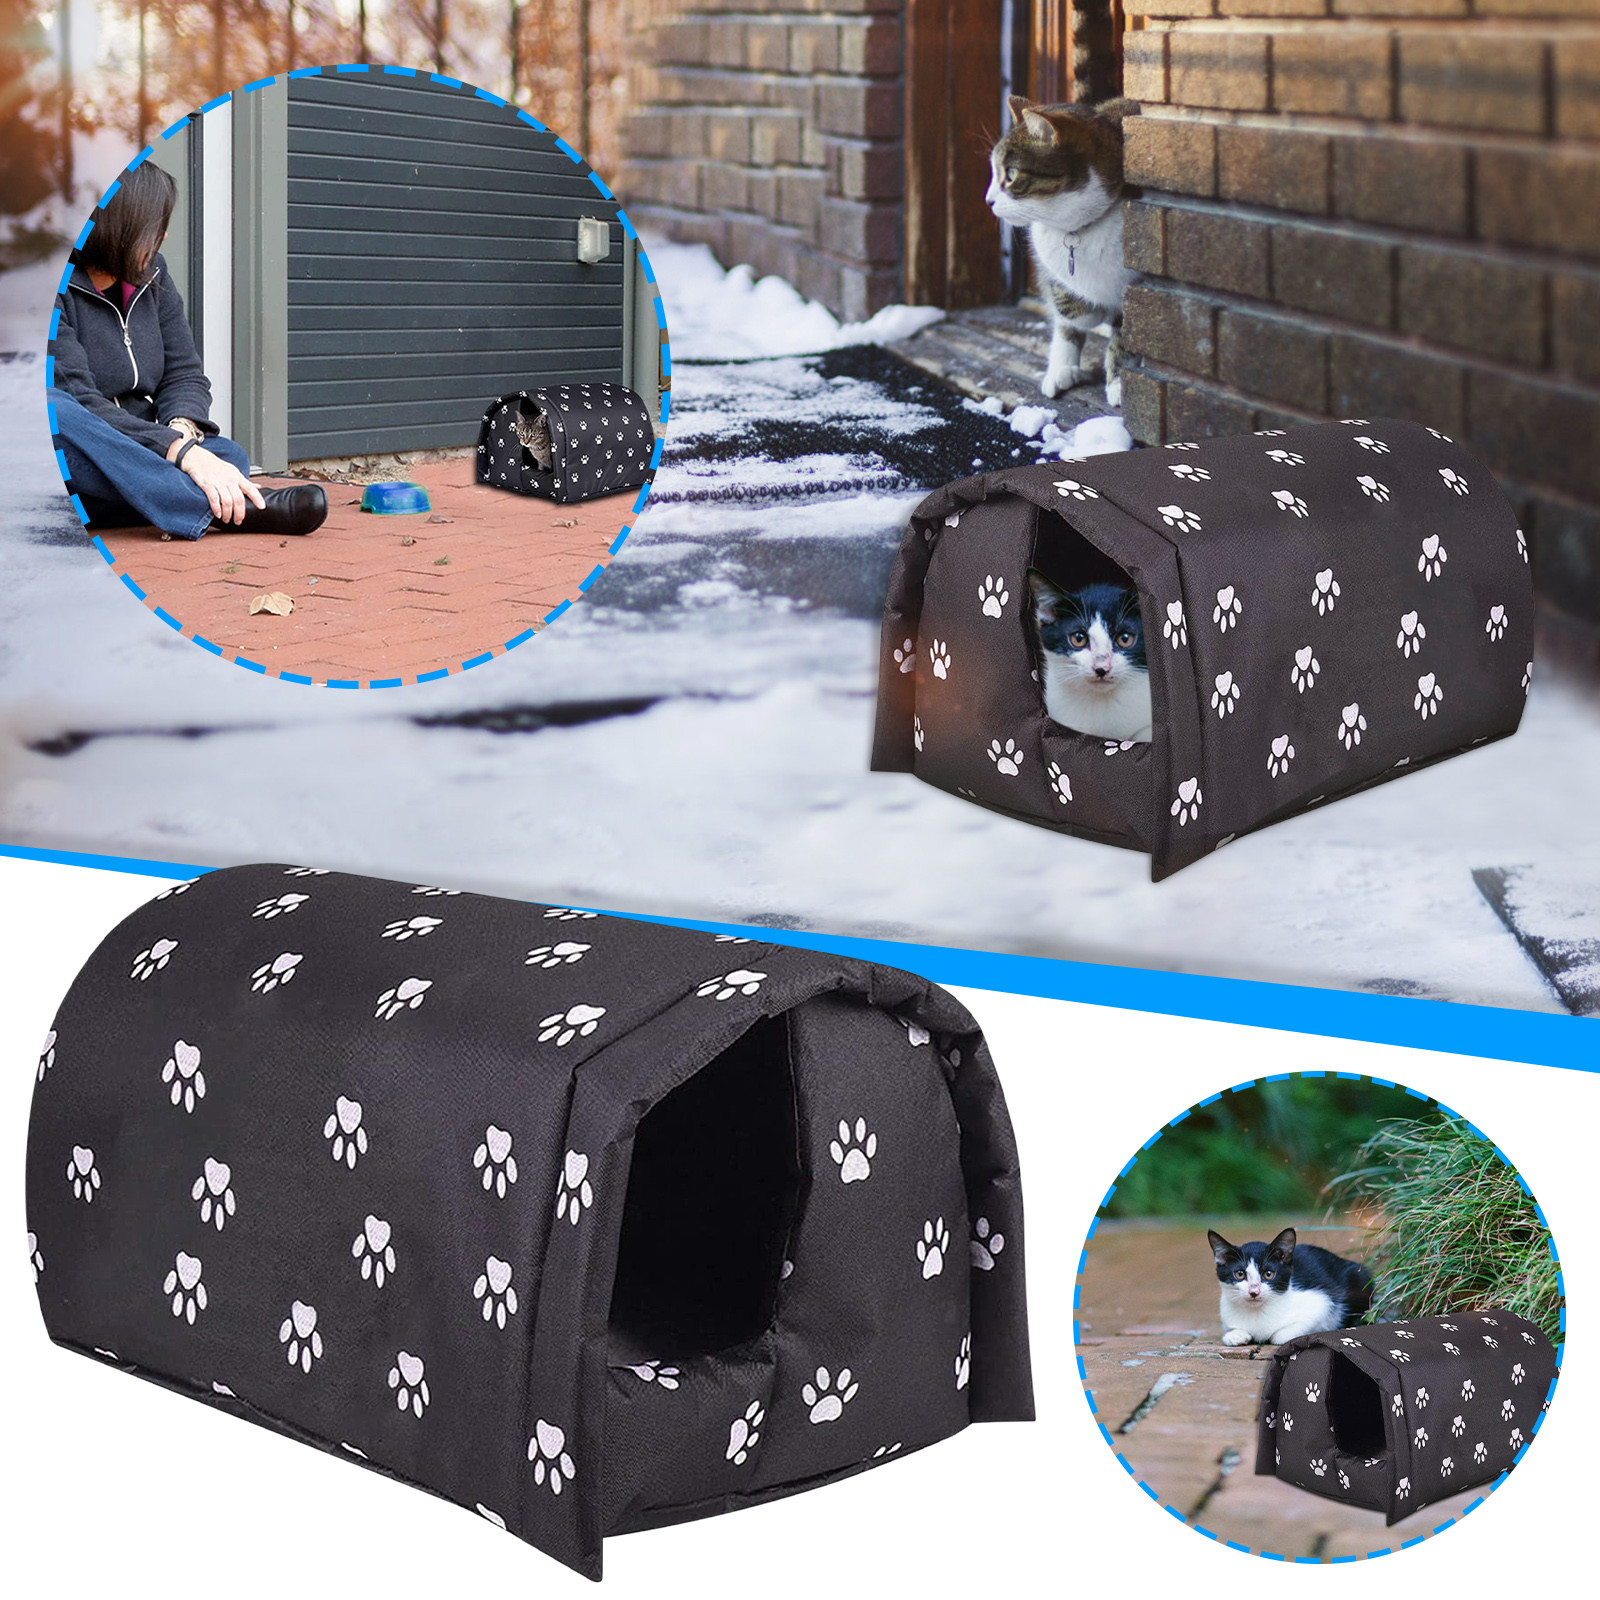 Thsue Cat Houses for Outdoor Cats, Outdoor Cat Houses for Feral Cats, Weatherproof  Waterproof Rainproof Foldable Thicken Cats Dogs Tent Shelter Home Keep Warm  Outdoor Cat Shelter for Winter (Black-L)